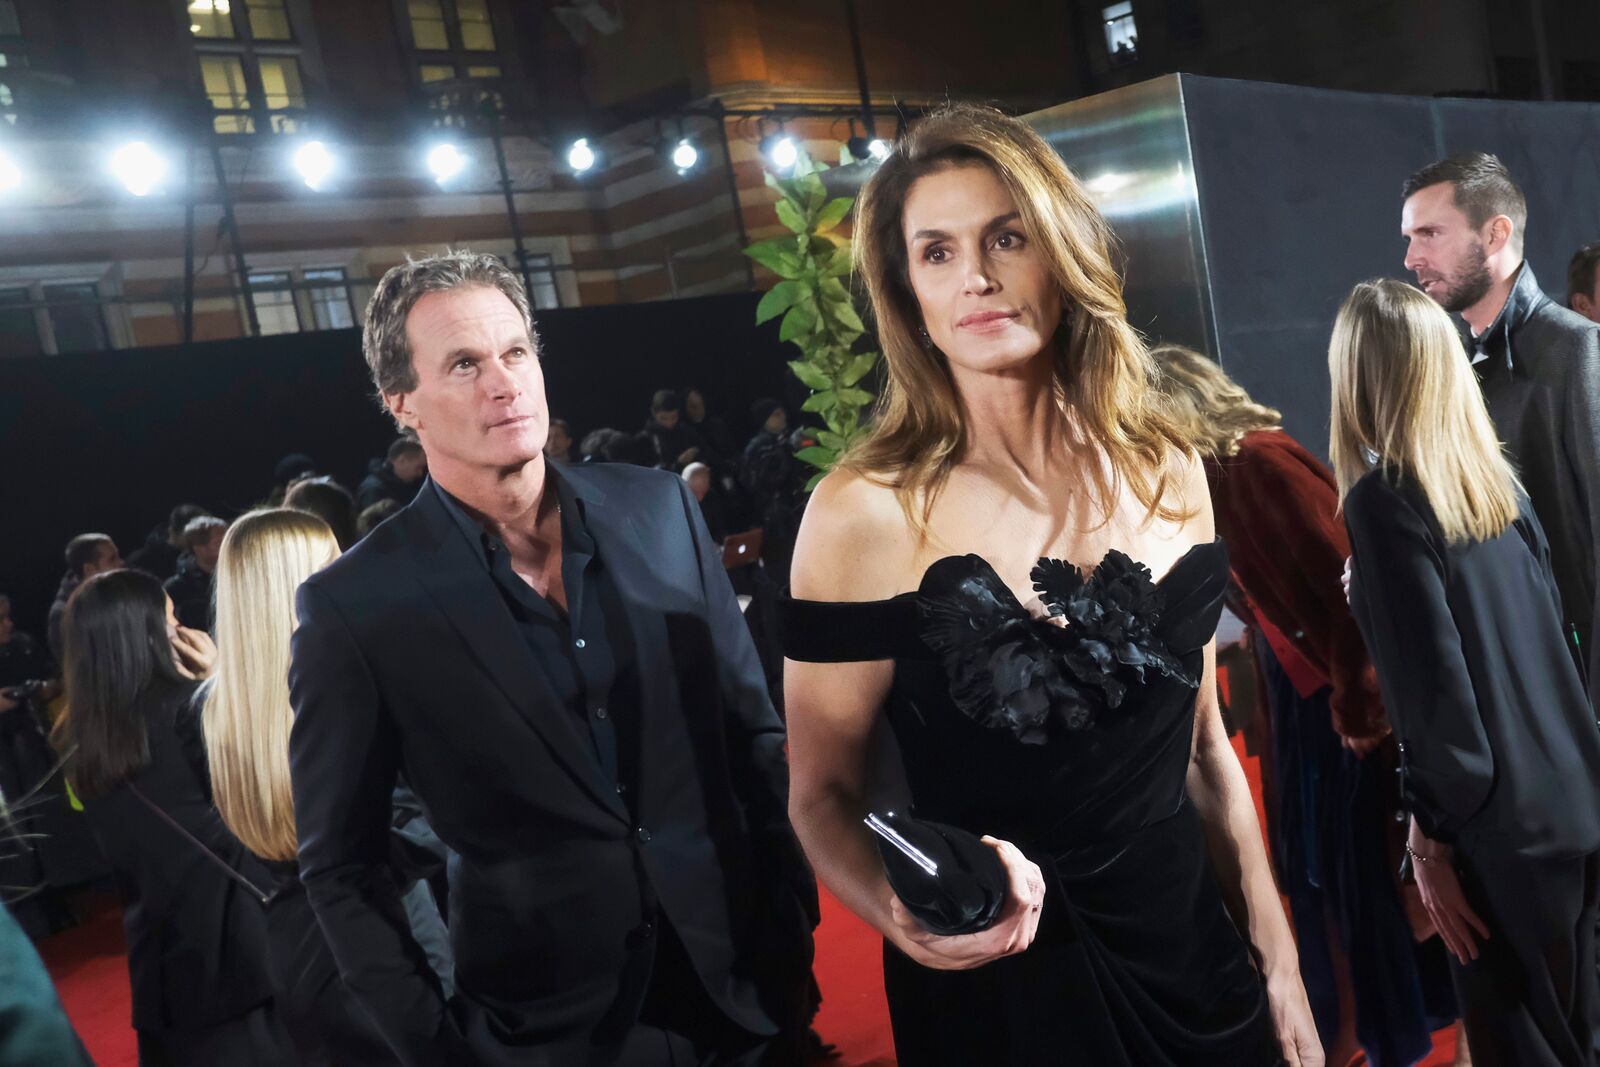 Randy Gerber et Cindy Crawford arrivent aux Fashion Awards 2018. | Source: Getty Images